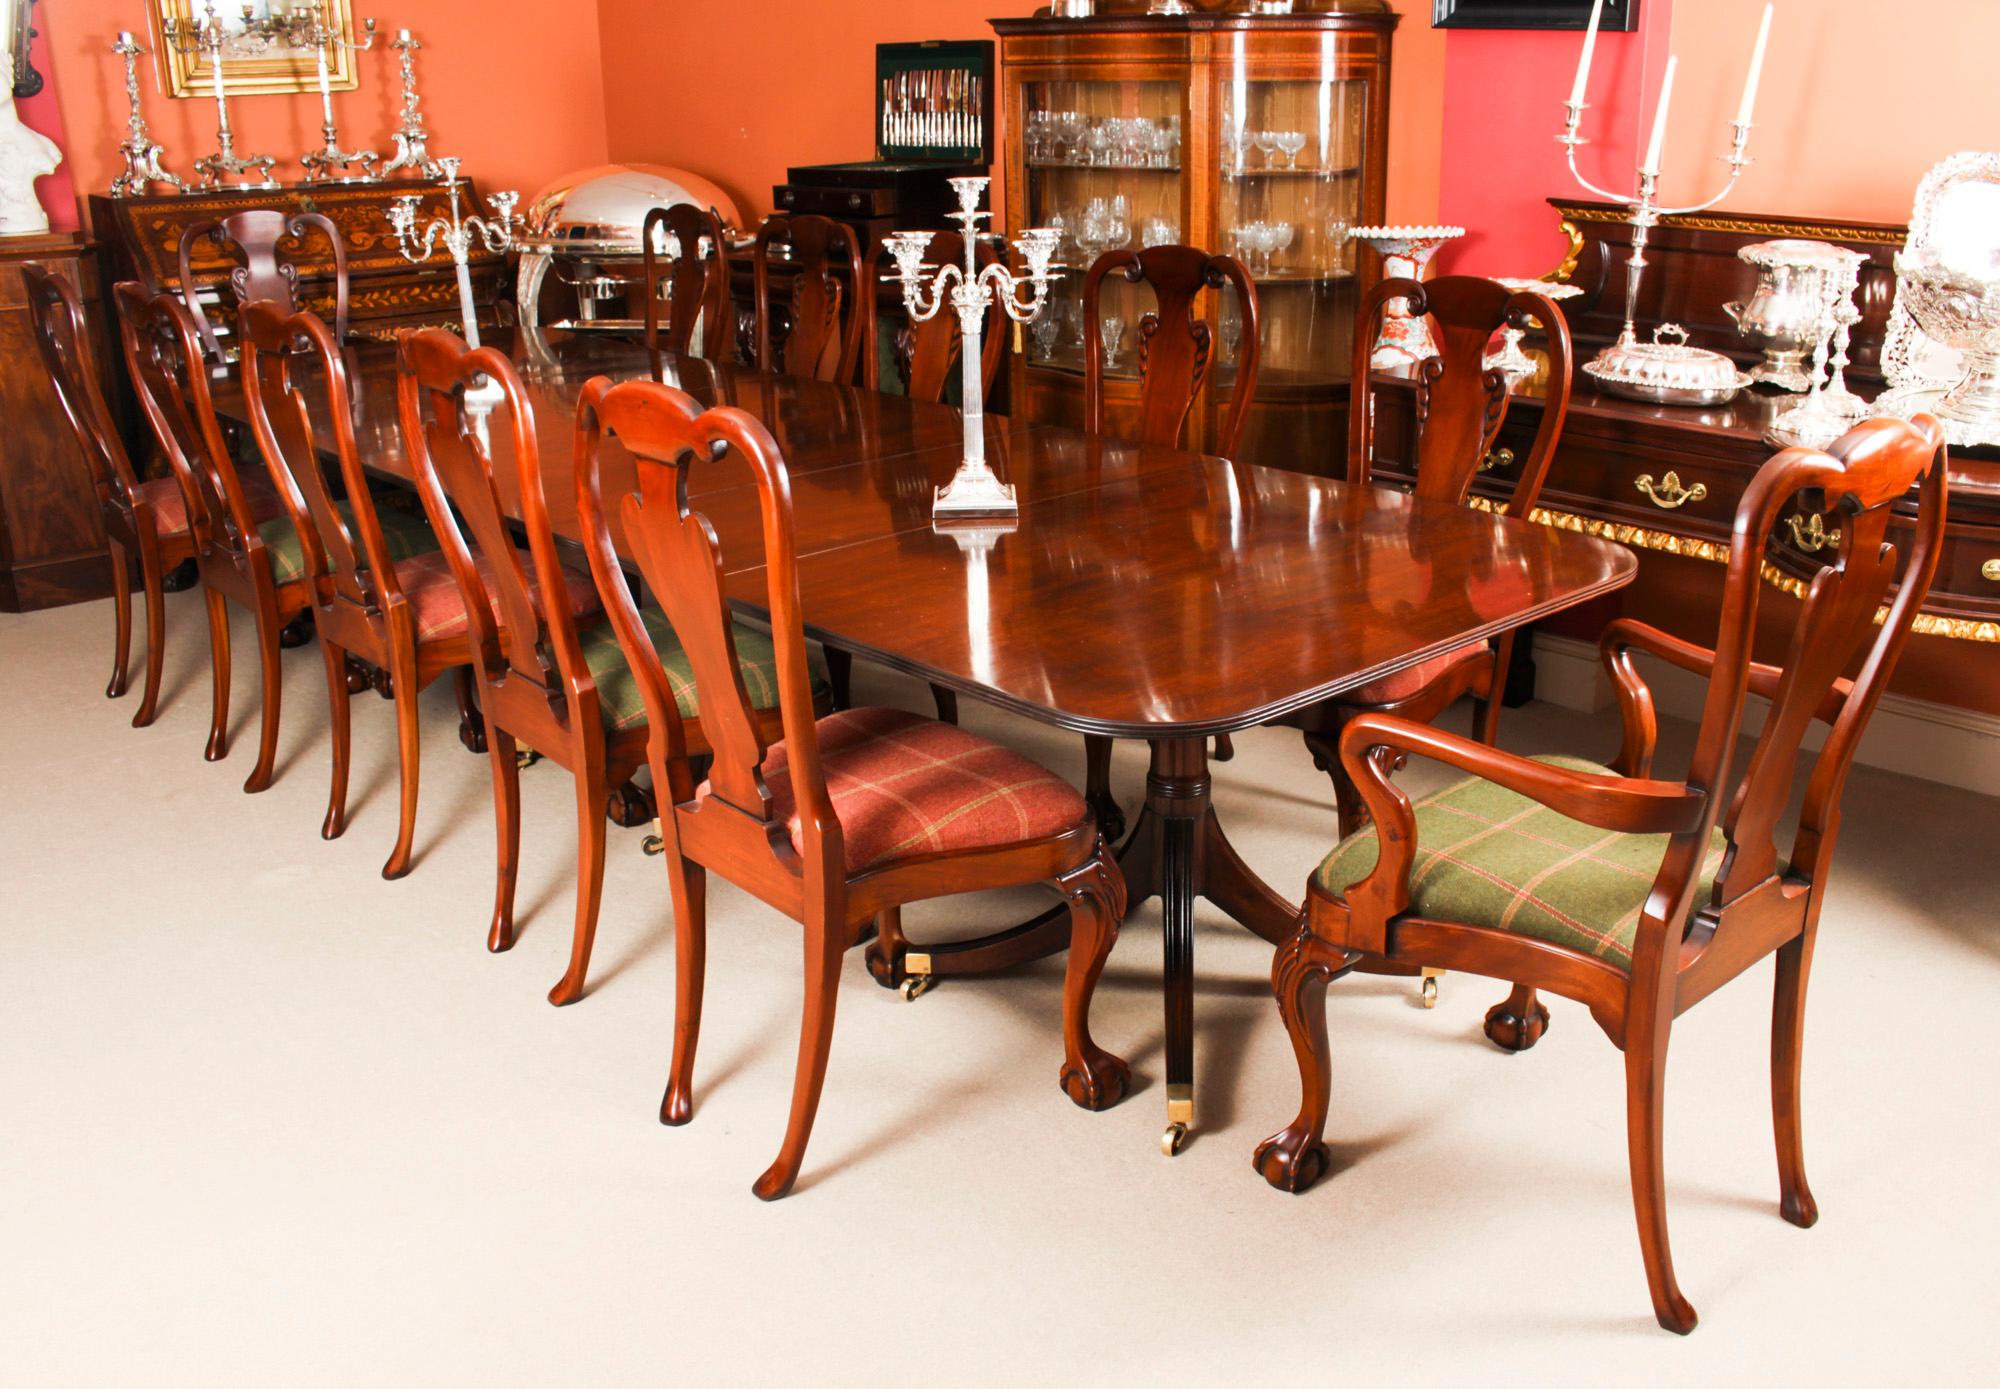 This is fabulous Vintage dining set comprising a Regency Revival dining table by William Tillman, circa 1980 and a Vintage set of 12 Queen Anne Revival mahogany Dining Chairs Mid 20th Century.

The table is made of stunning solid flame mahogany